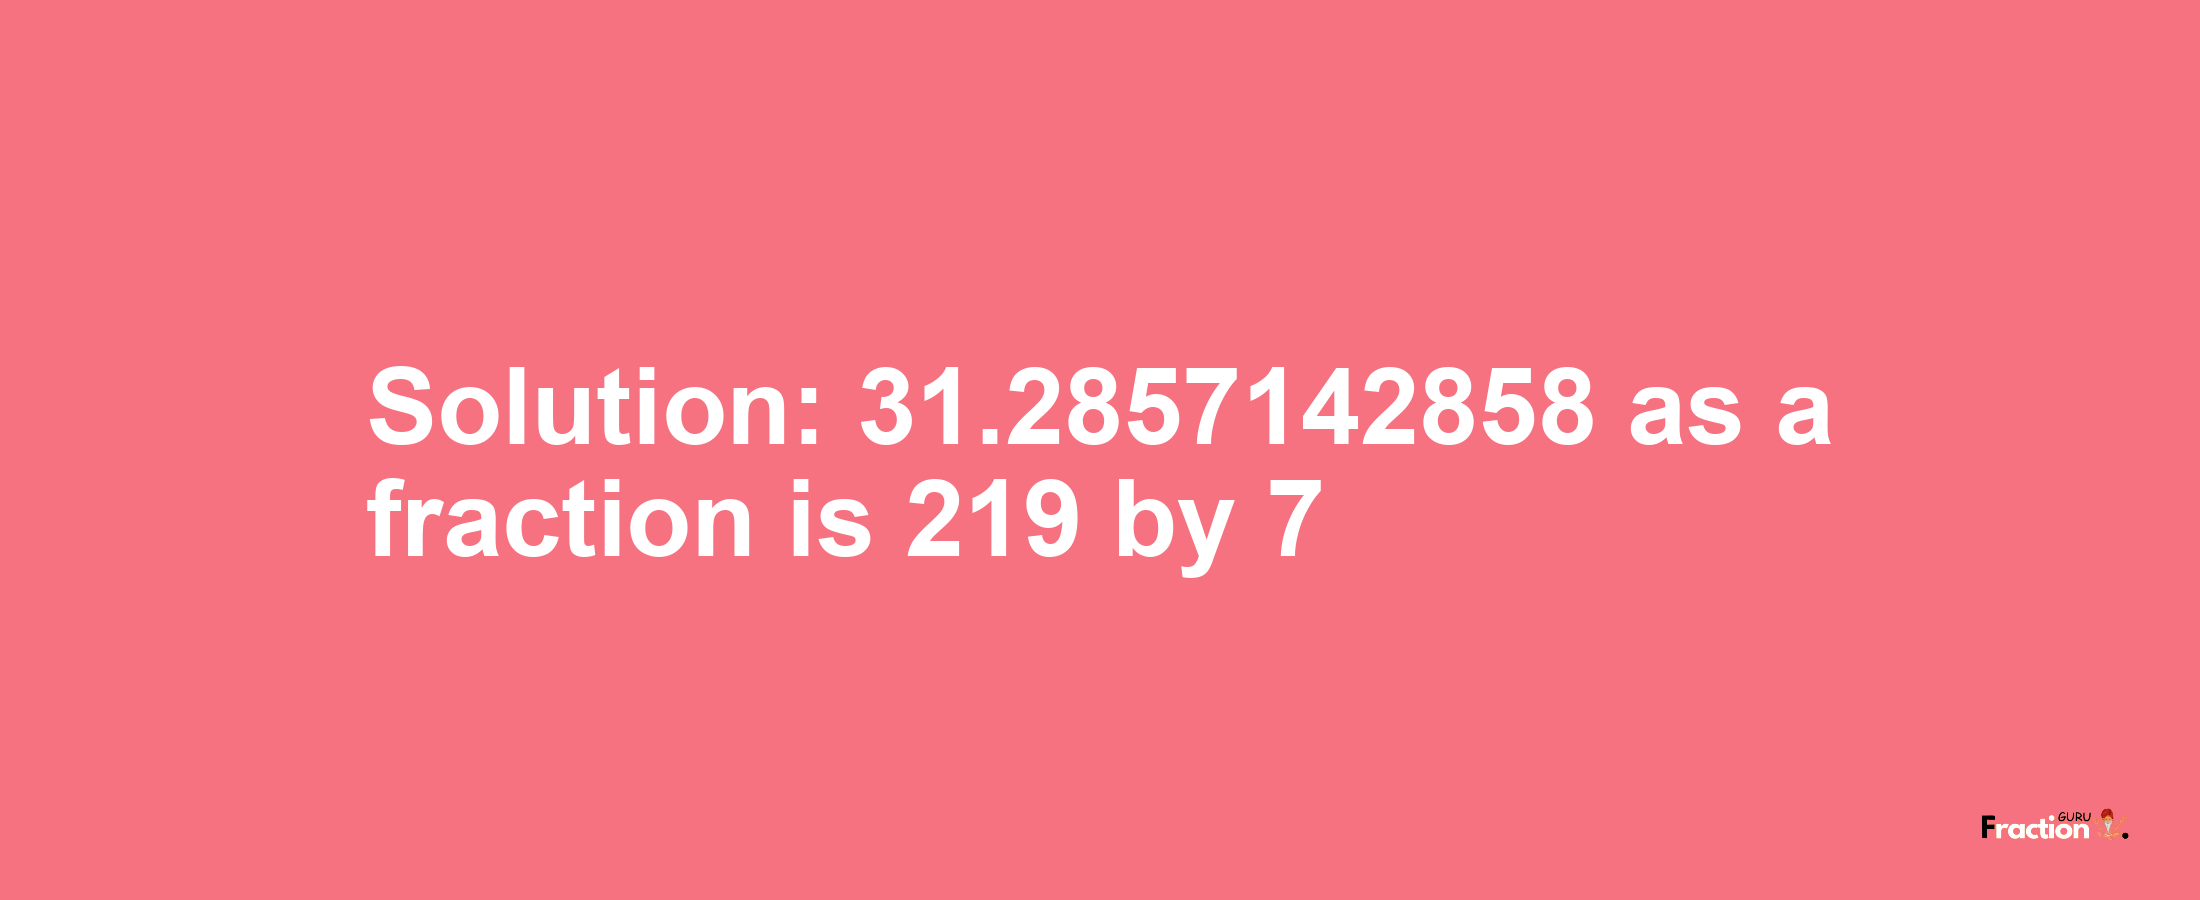 Solution:31.2857142858 as a fraction is 219/7